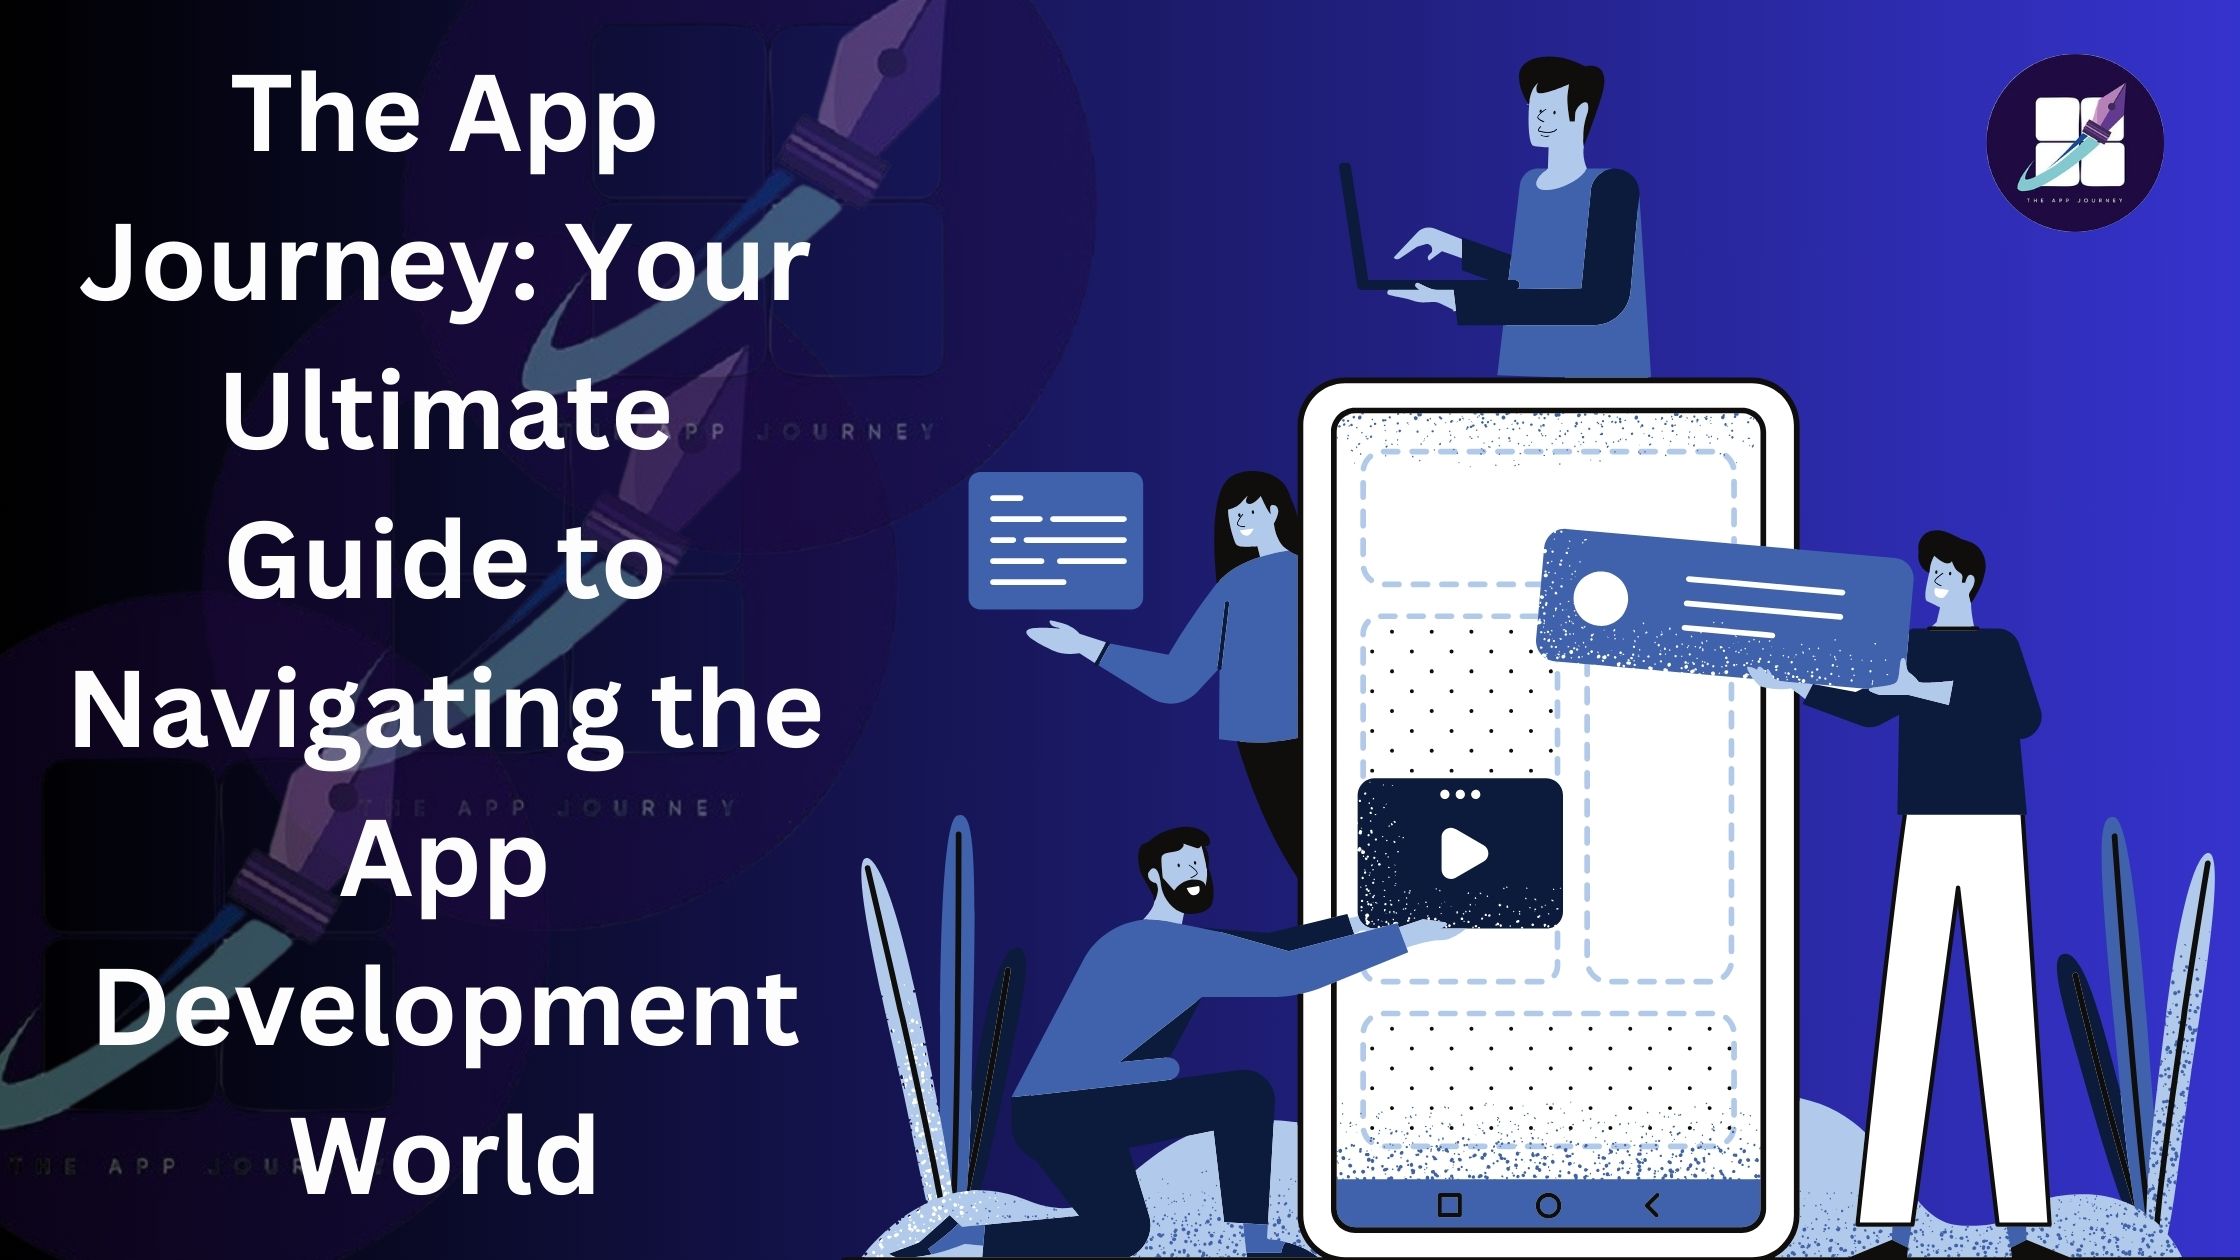 The App Journey: Your Ultimate Guide to Navigating the App Development World